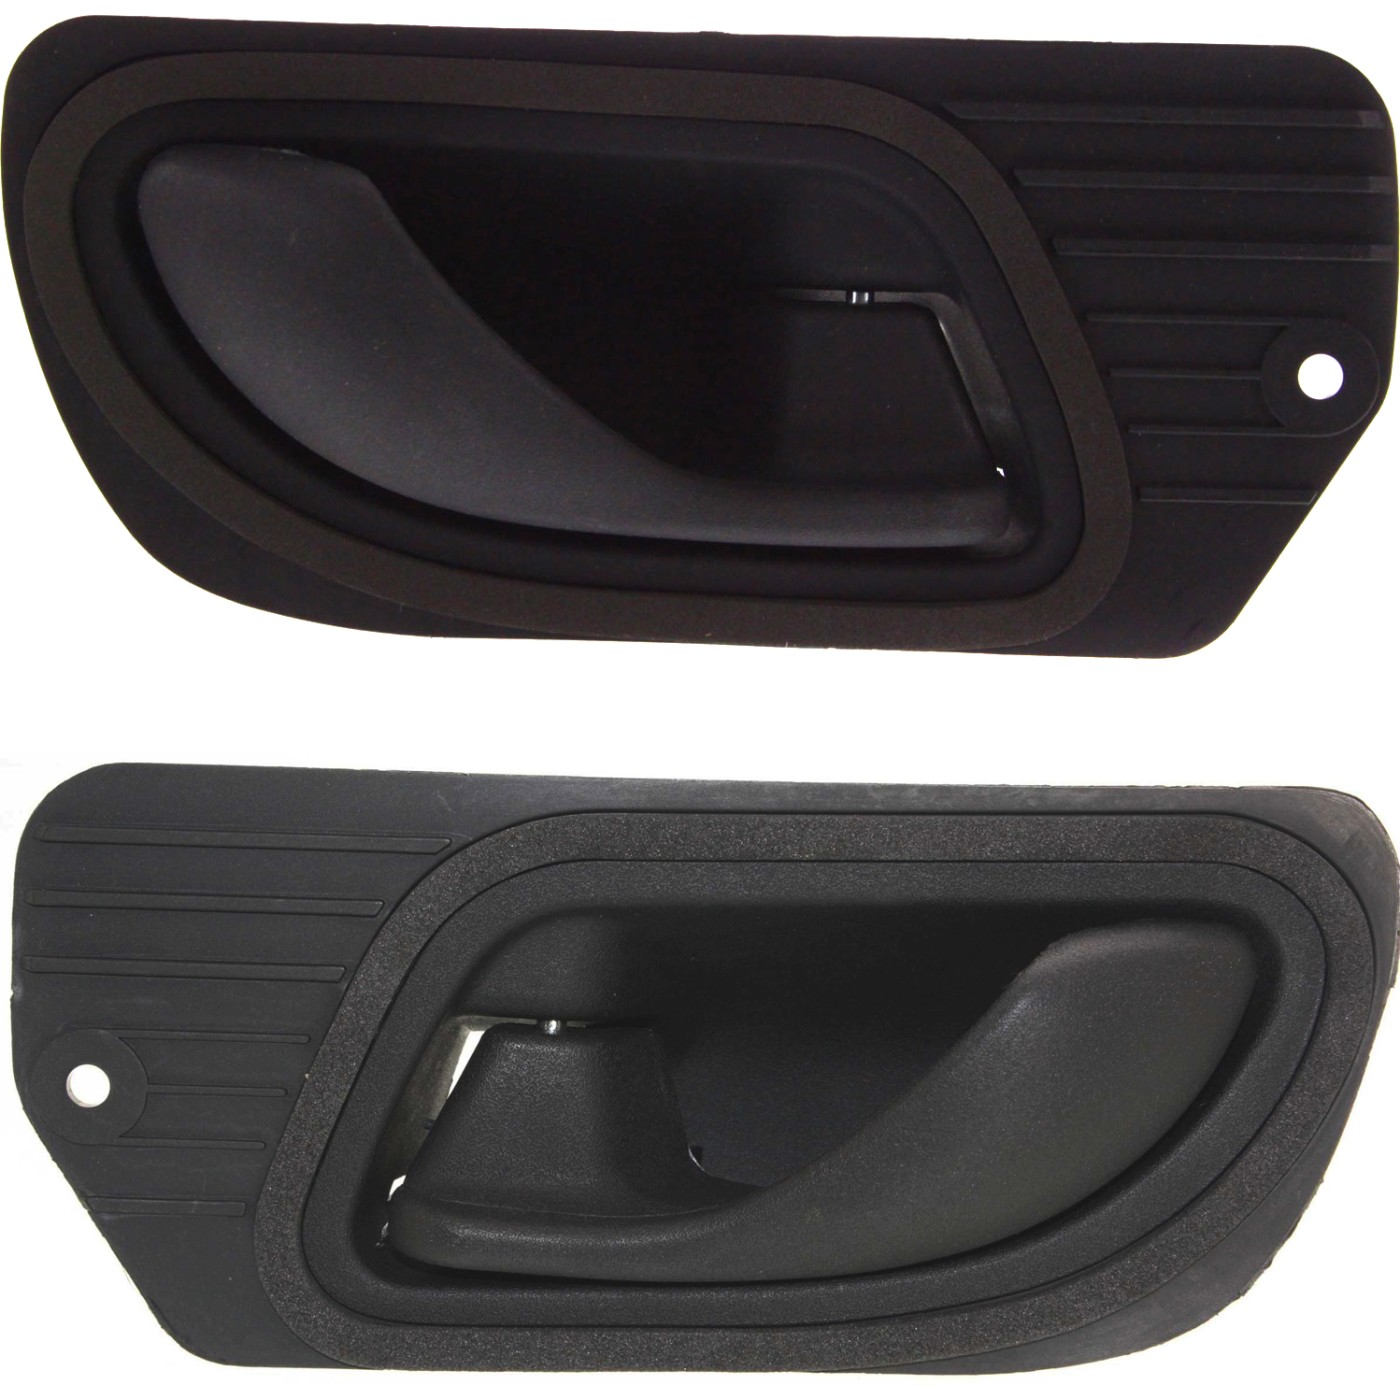 Details About Interior Door Handle For 93 2011 Ford Ranger 94 2008 Mazda B3000 Set Of 2 Front